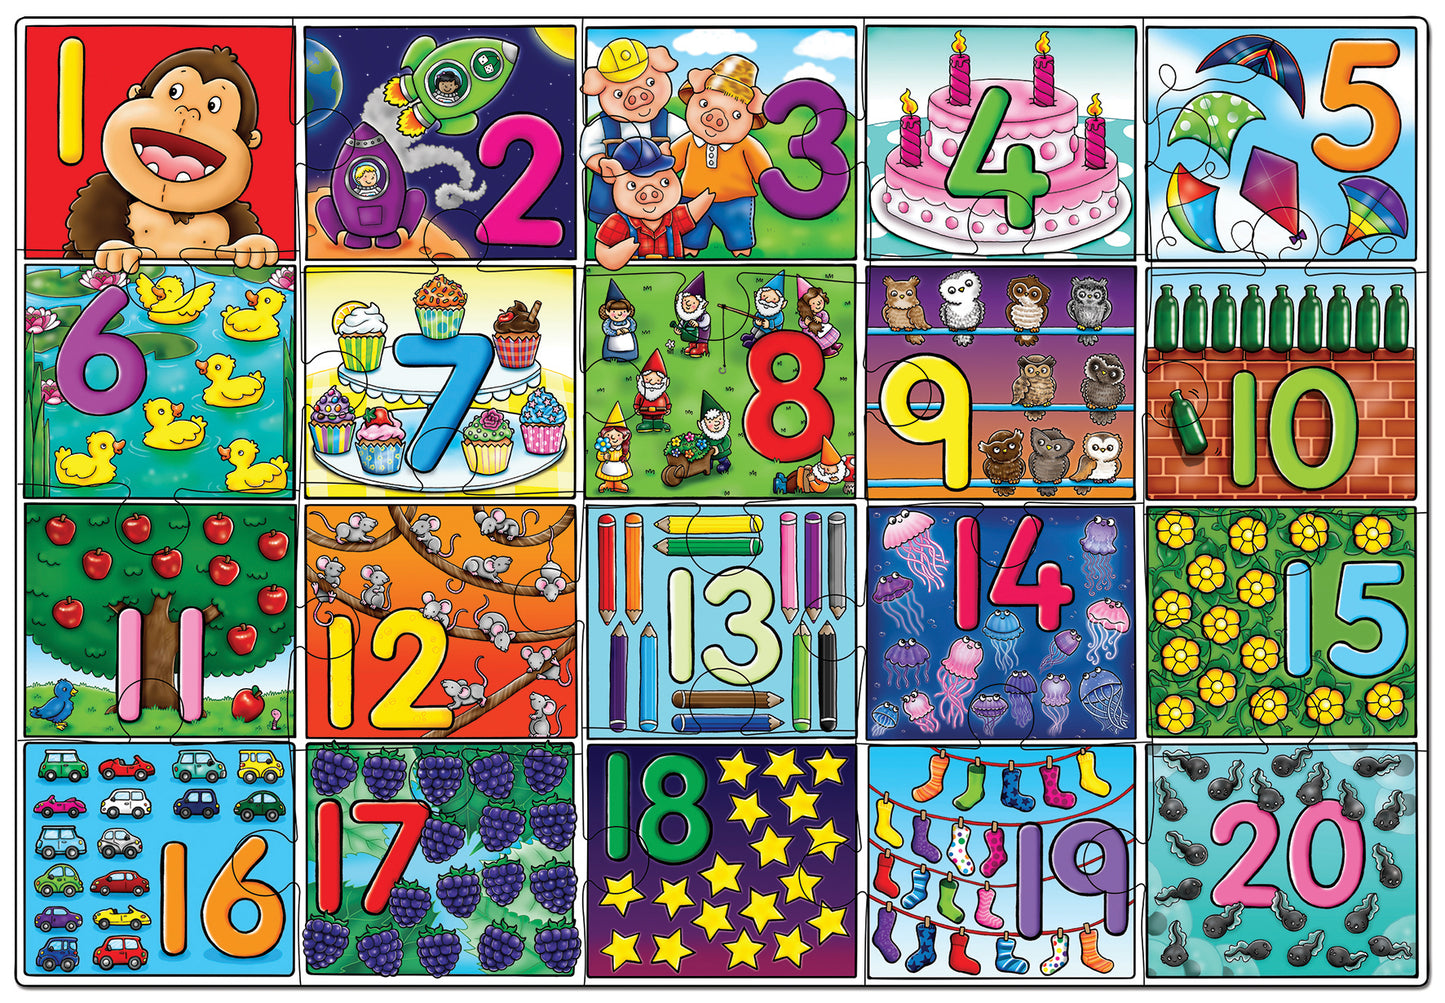 Orchard Toys Big Number Jigsaw Puzzle